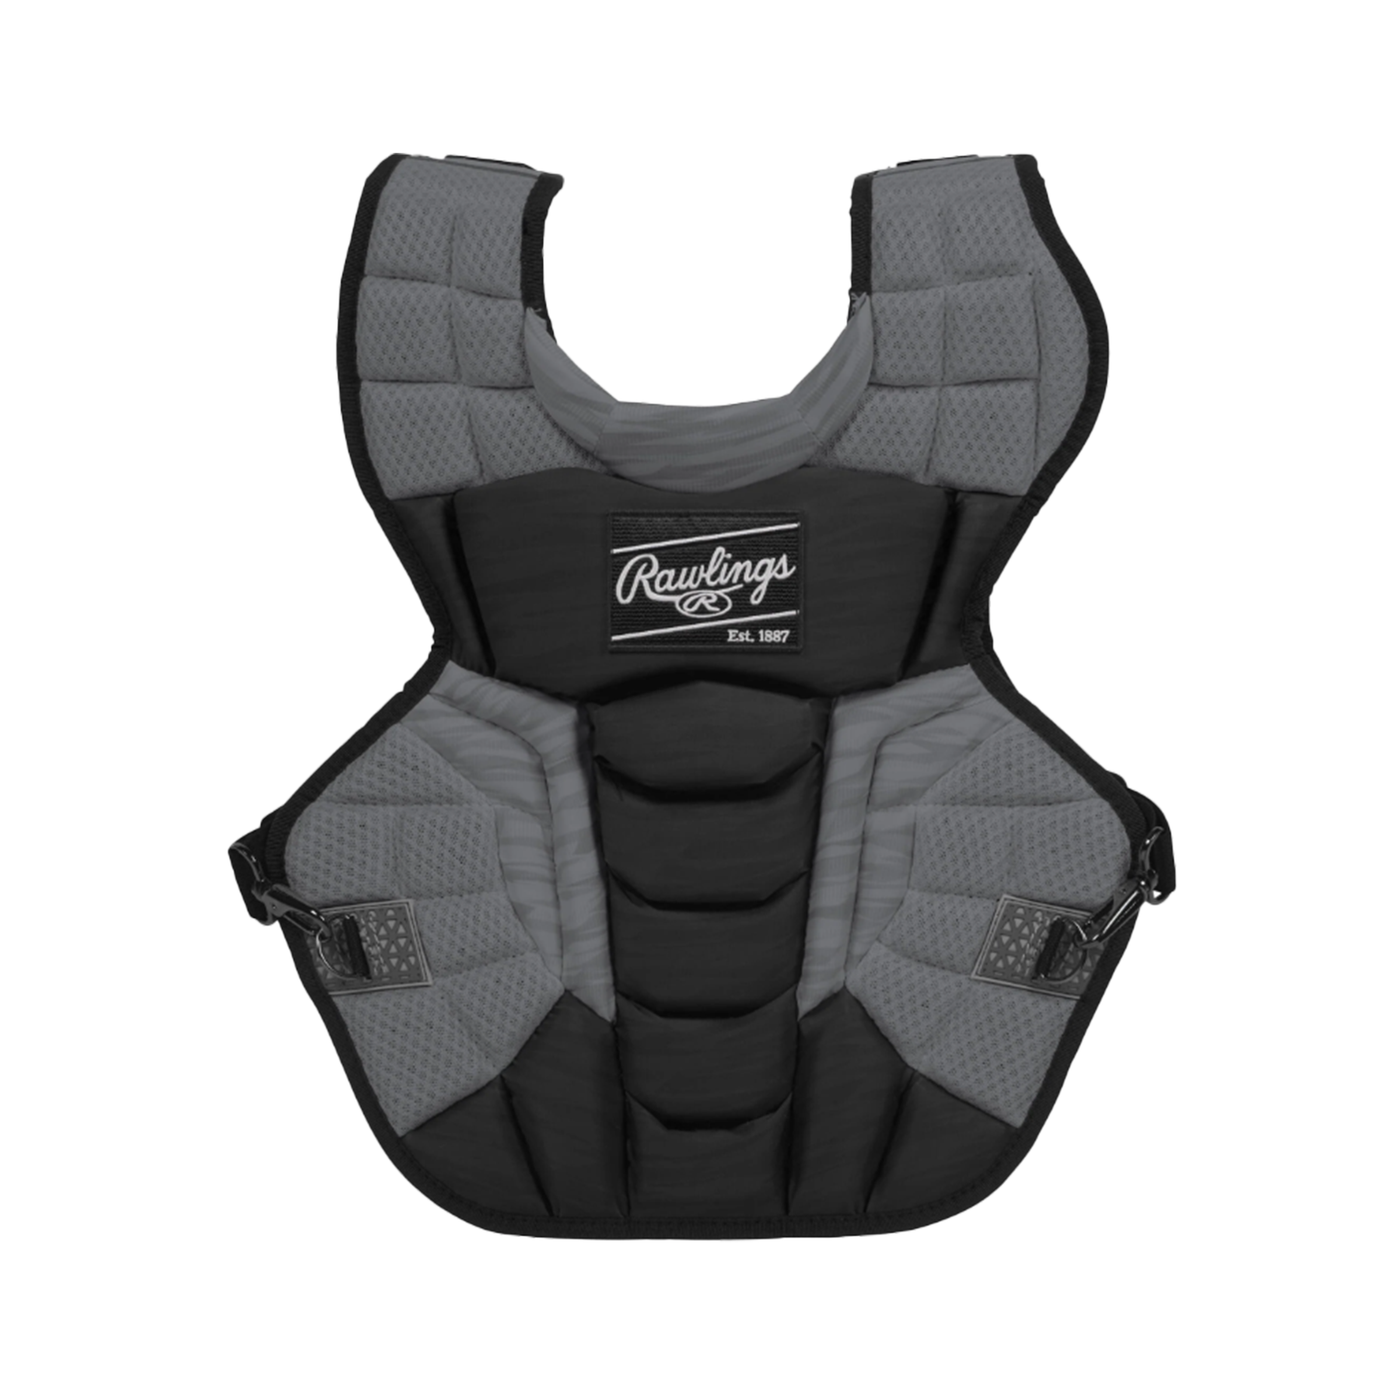 Rawlings Velo 2.0 Chest Protector